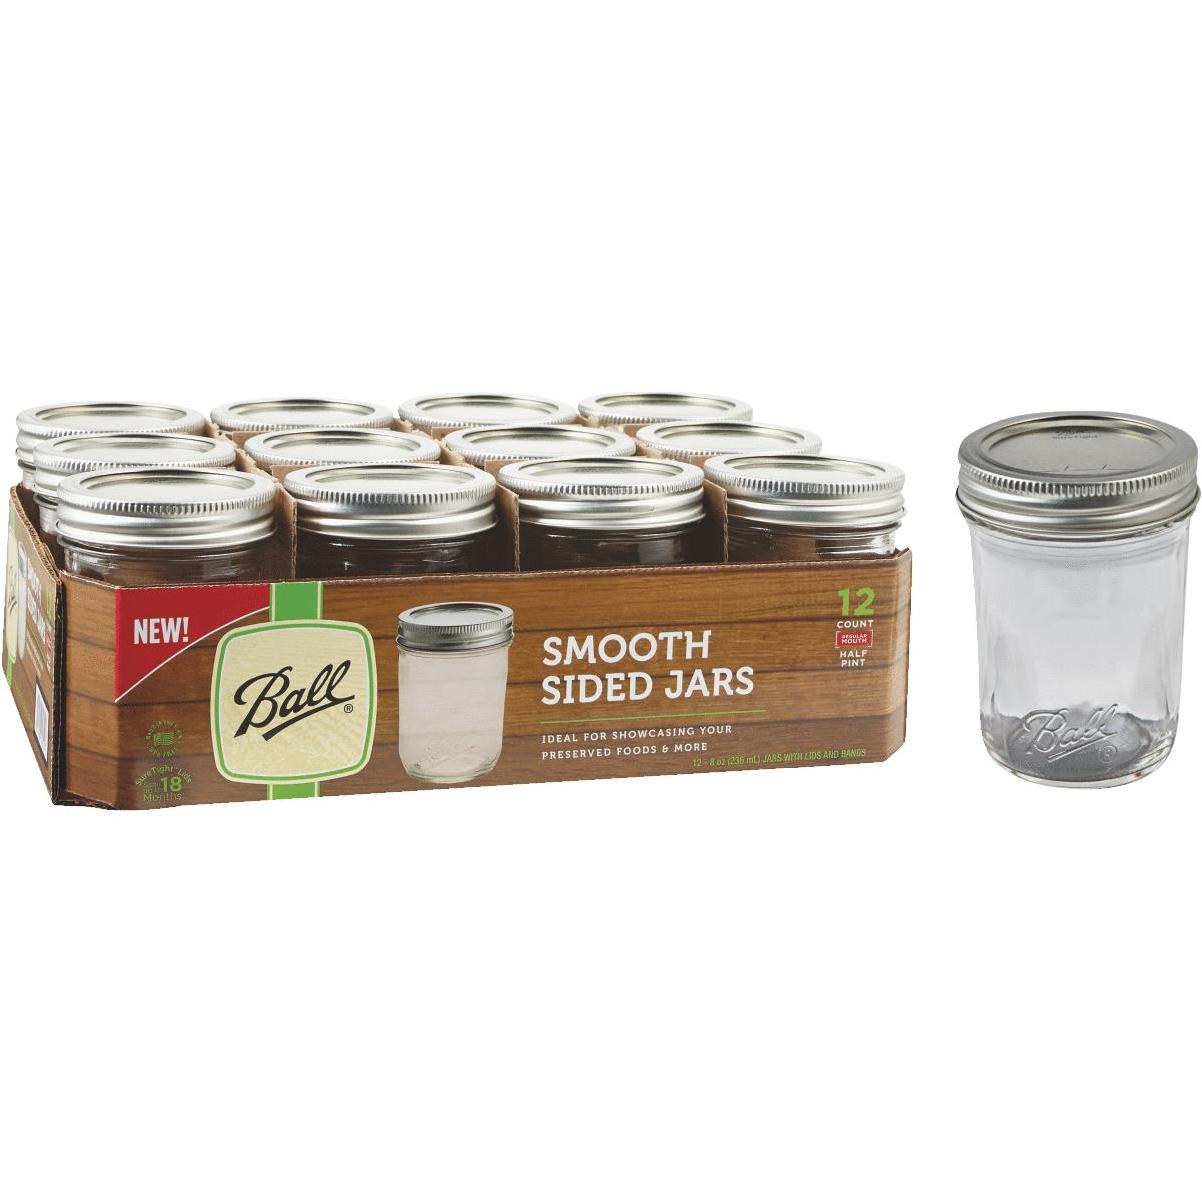 Mason Jars 8 oz With Regular Silver Lids and Bands, Ideal for Jam